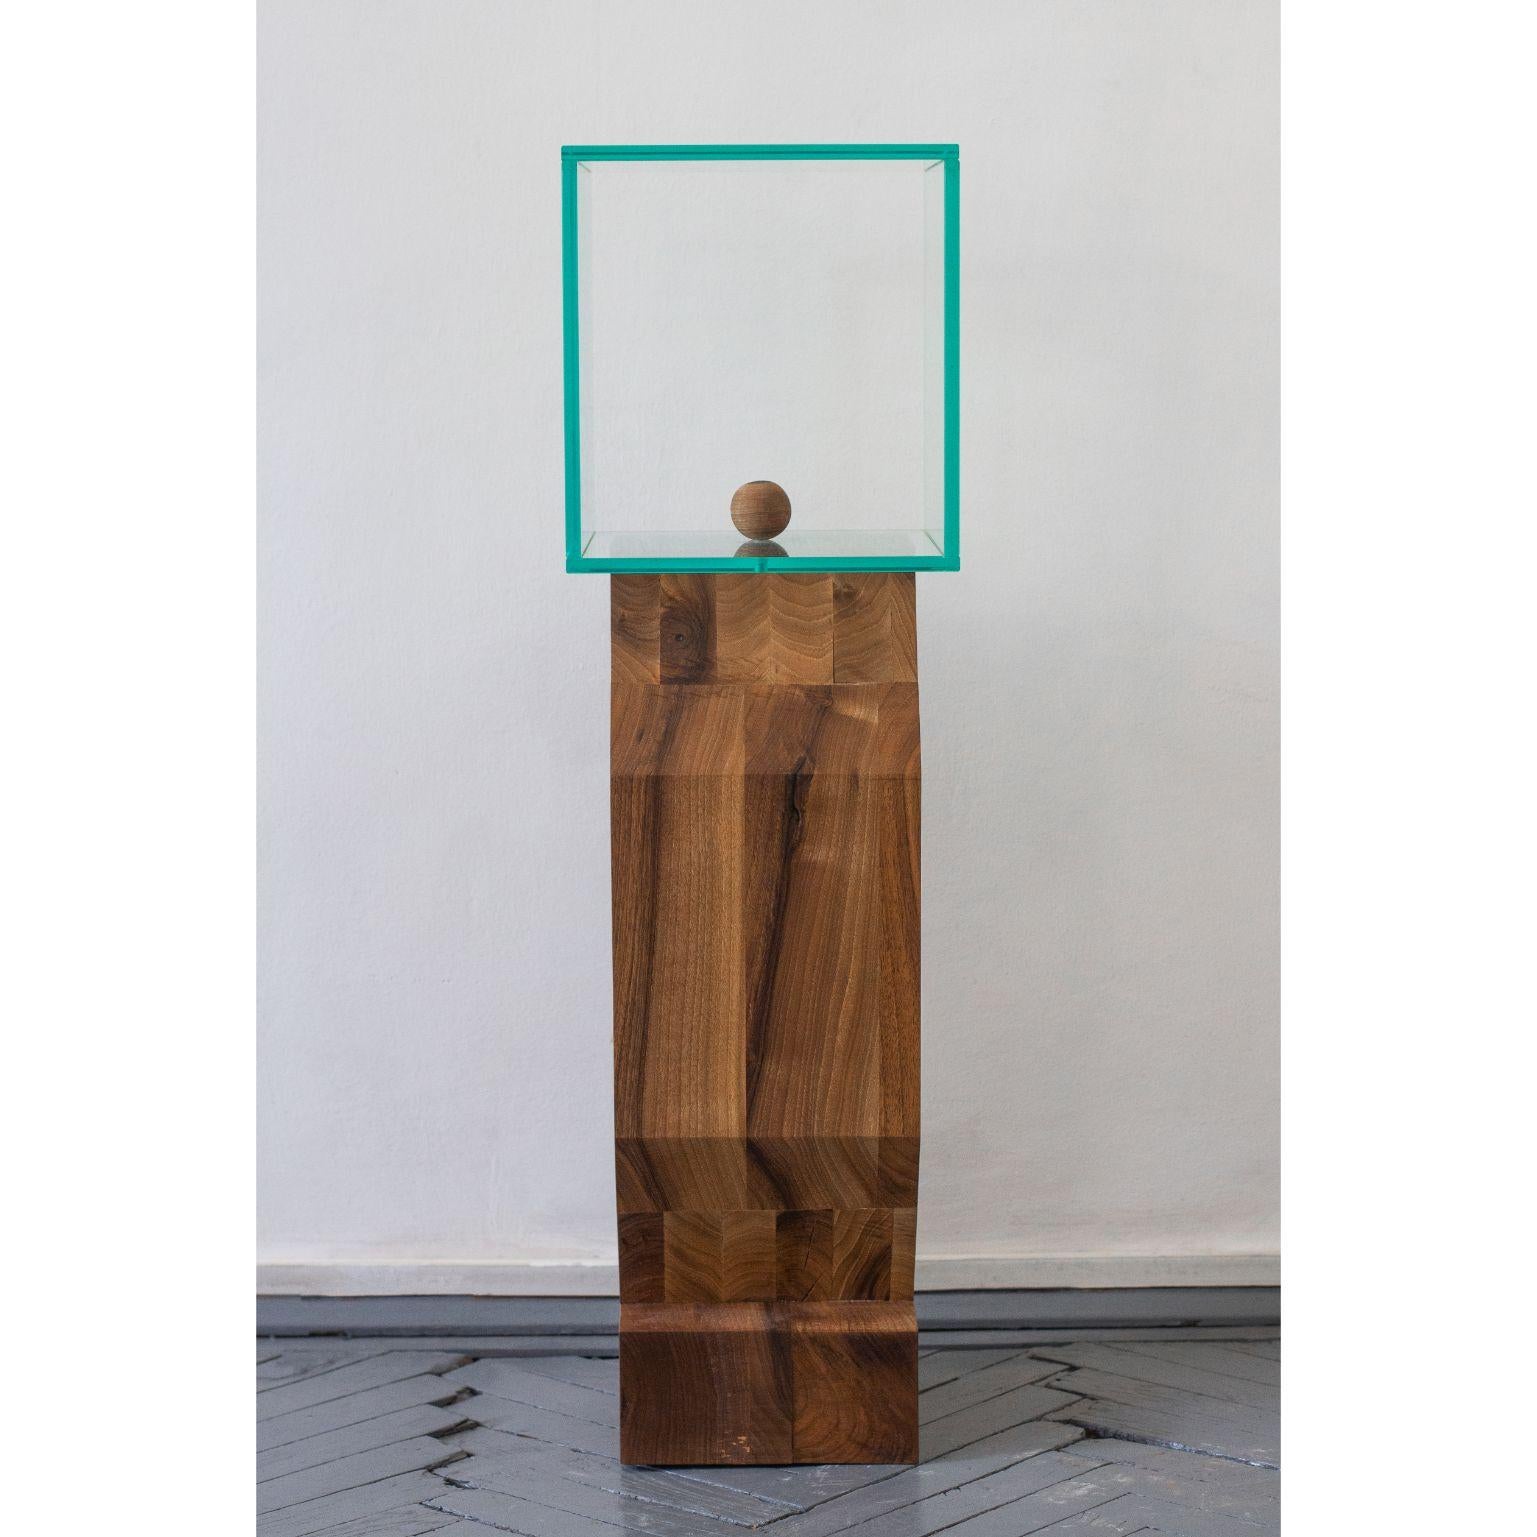 Wood figure with glass head by Radu Abraham
Limited Edition of 10
Materials: Walnut wood, glass
Dimensions: 25 x 25 x 87 cm

A massive block of walnut wood, glued together in shape then cut directly in block for getting the wanted shape. On top,